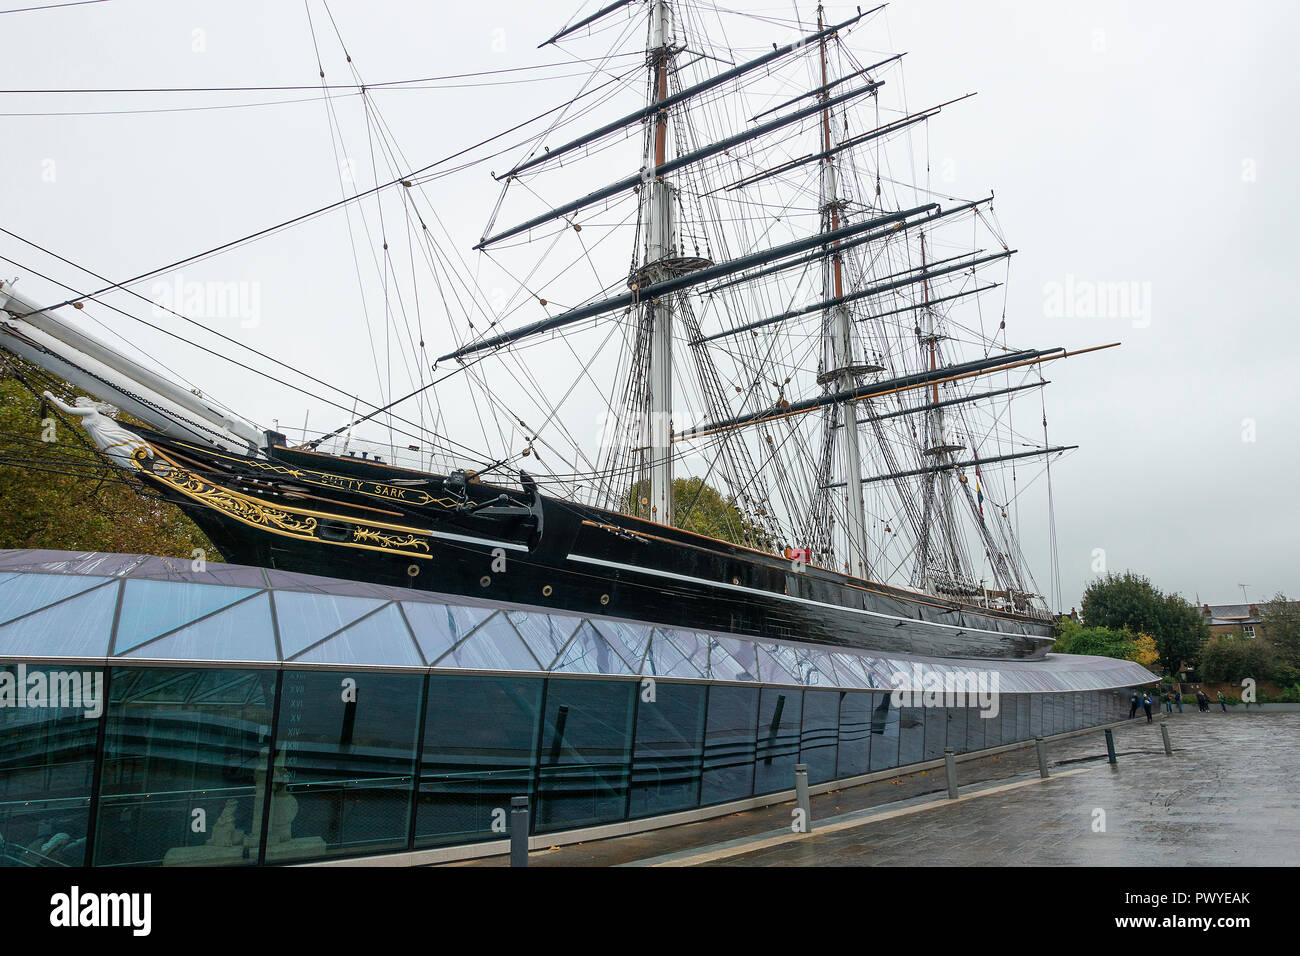 The Cutty Sark Tea Clipper Sailing Ship Open to the Public as a Museum Piece at Greenwich on the River Thames London England United Kingdom UK Stock Photo